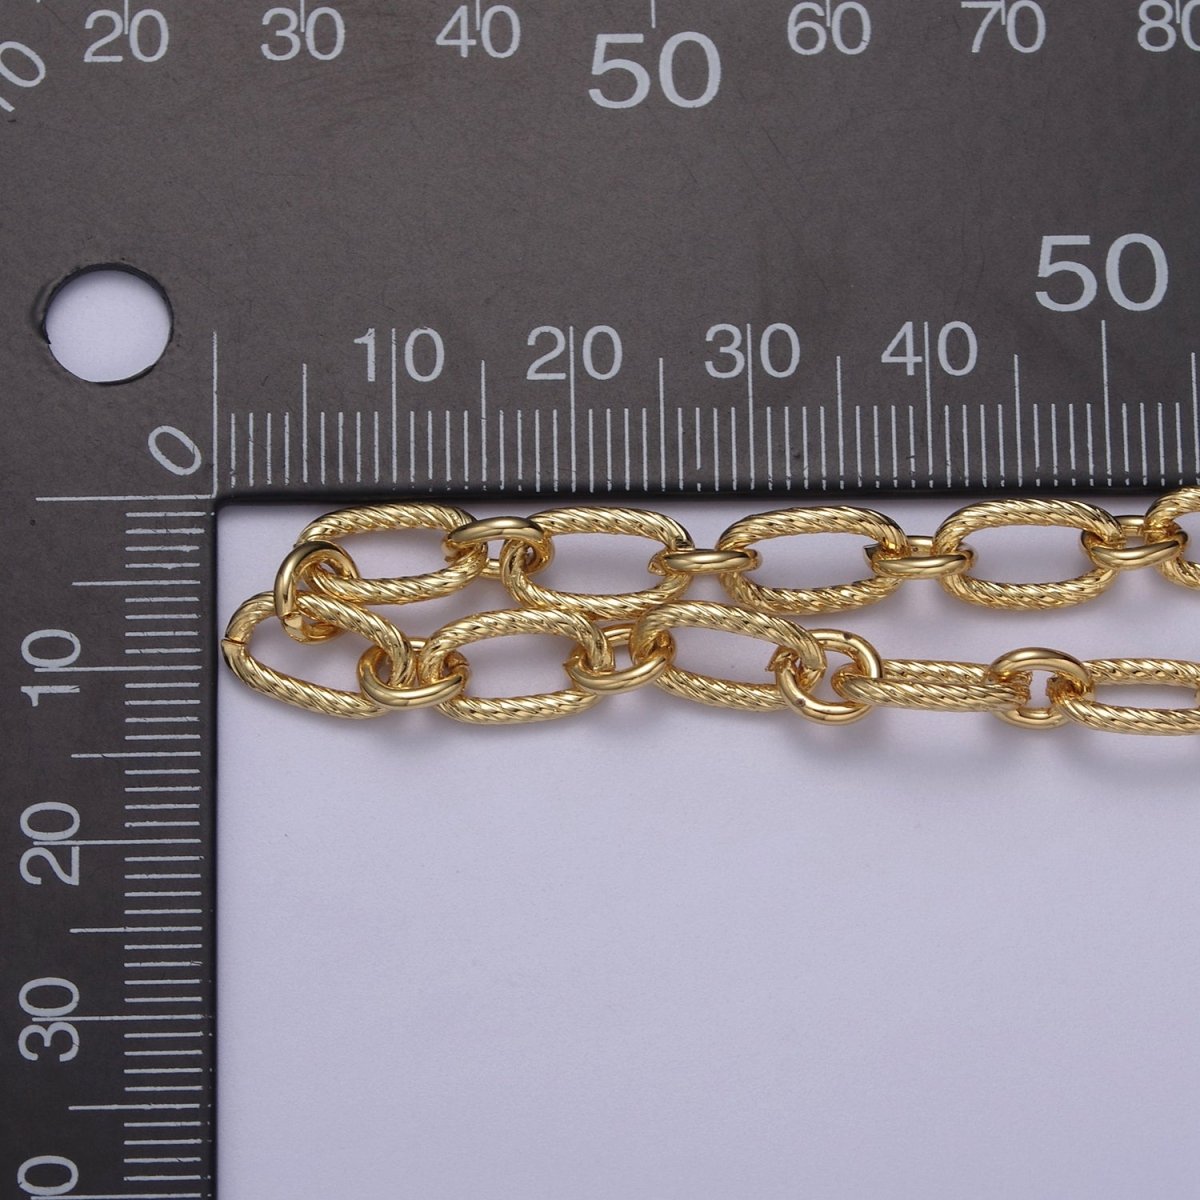 14K Gold Filled Textured Cable Unfinished Chain, Unique Cable Roll by Yard For Jewelry Making | ROLL-707 Clearance Pricing - DLUXCA